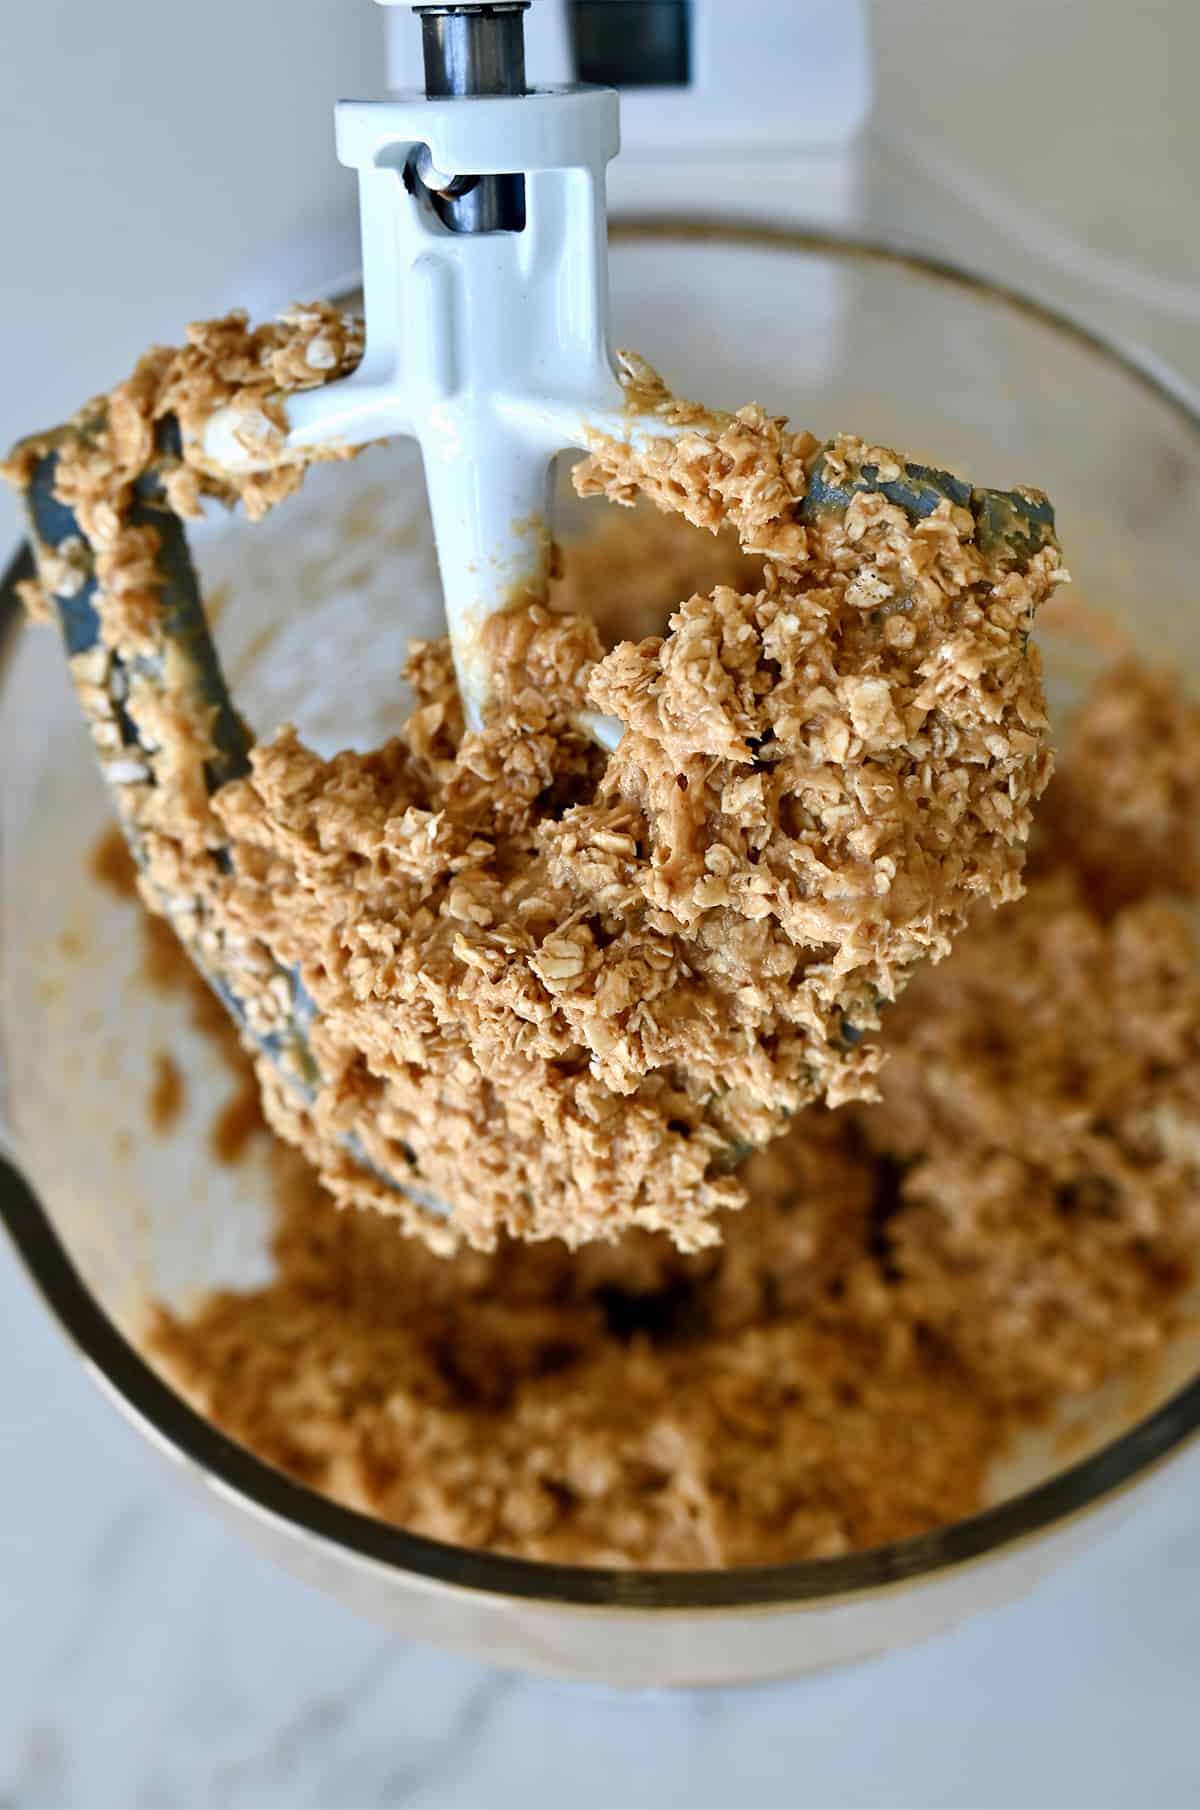 An oatmeal peanut butter mixture covering the paddle attachment of a stand mixture.